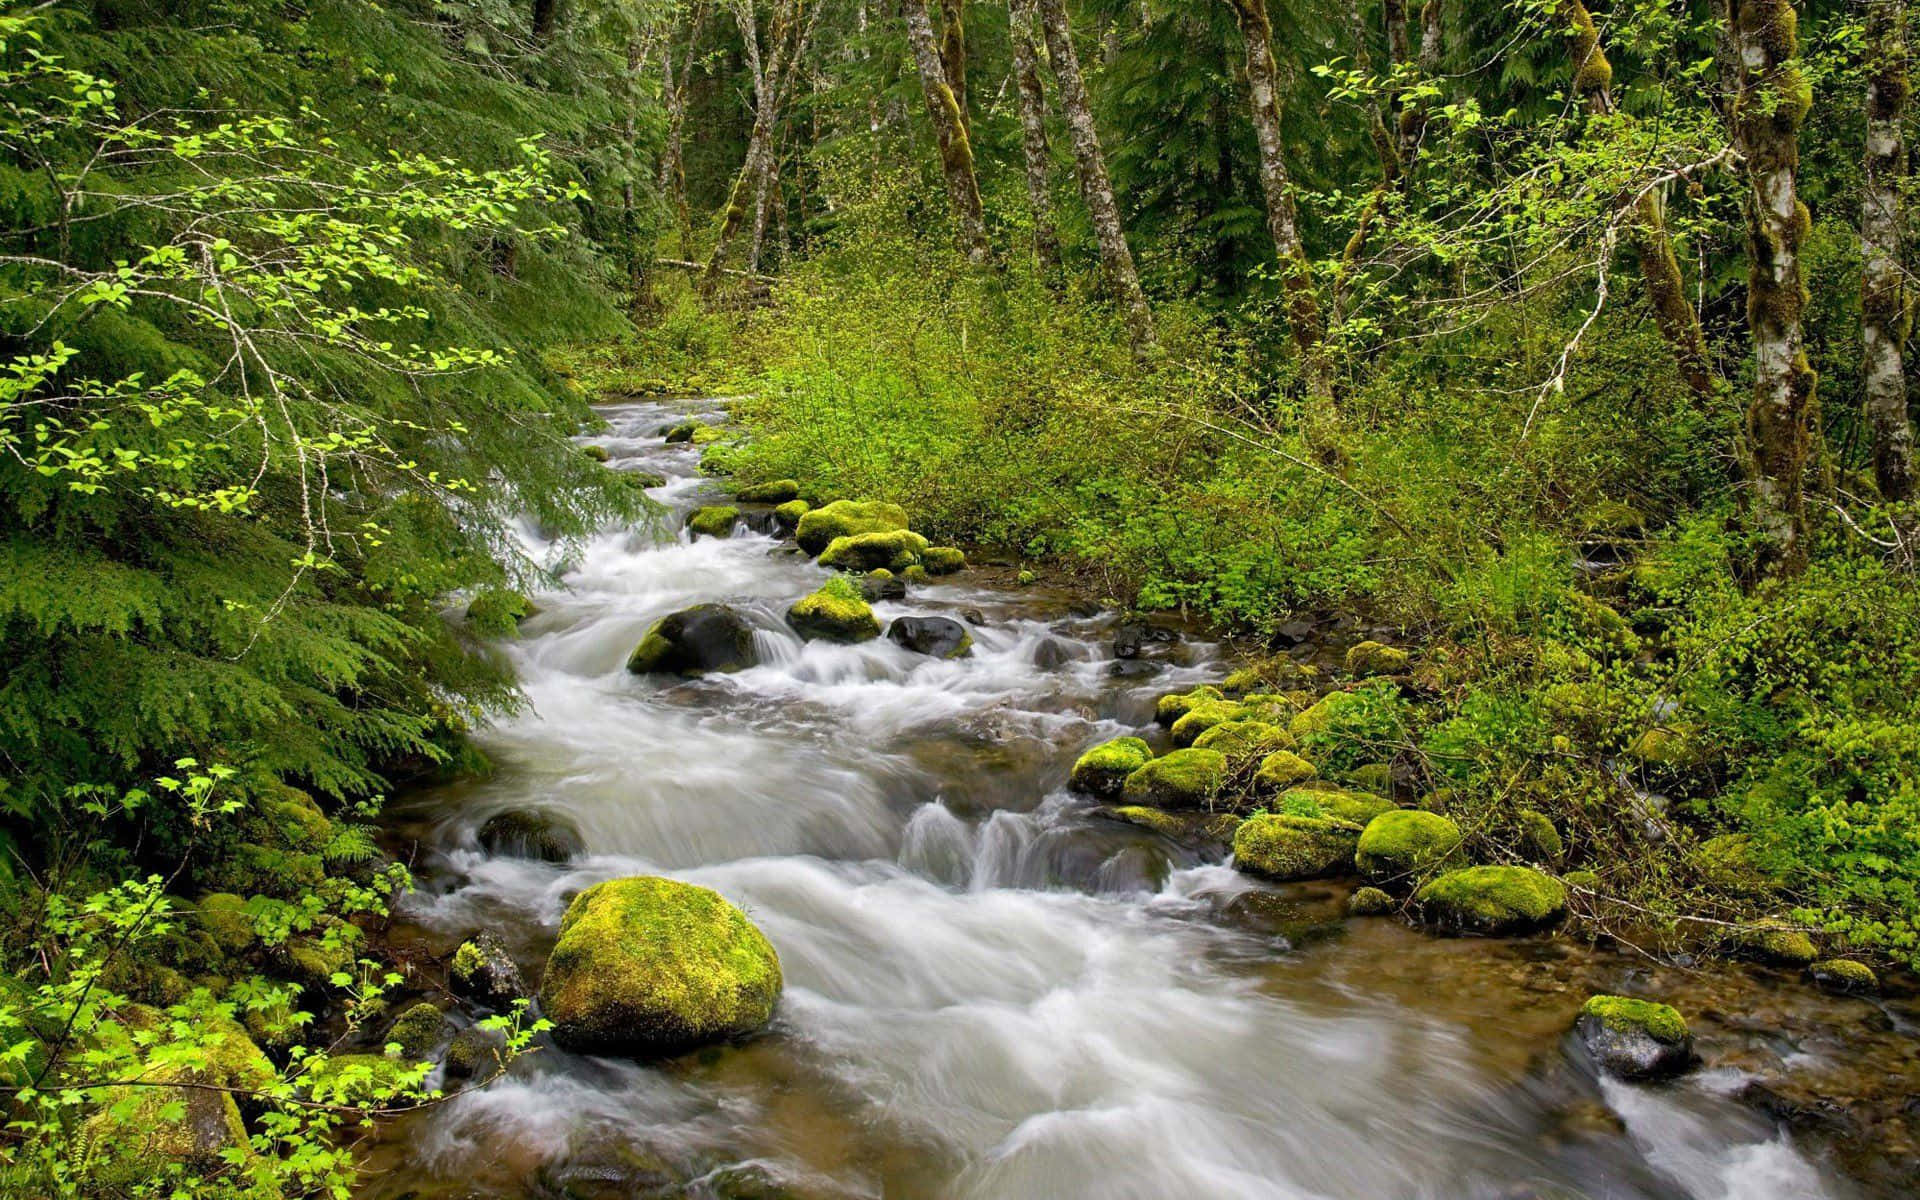 A peaceful serene view of a small, rushing creek